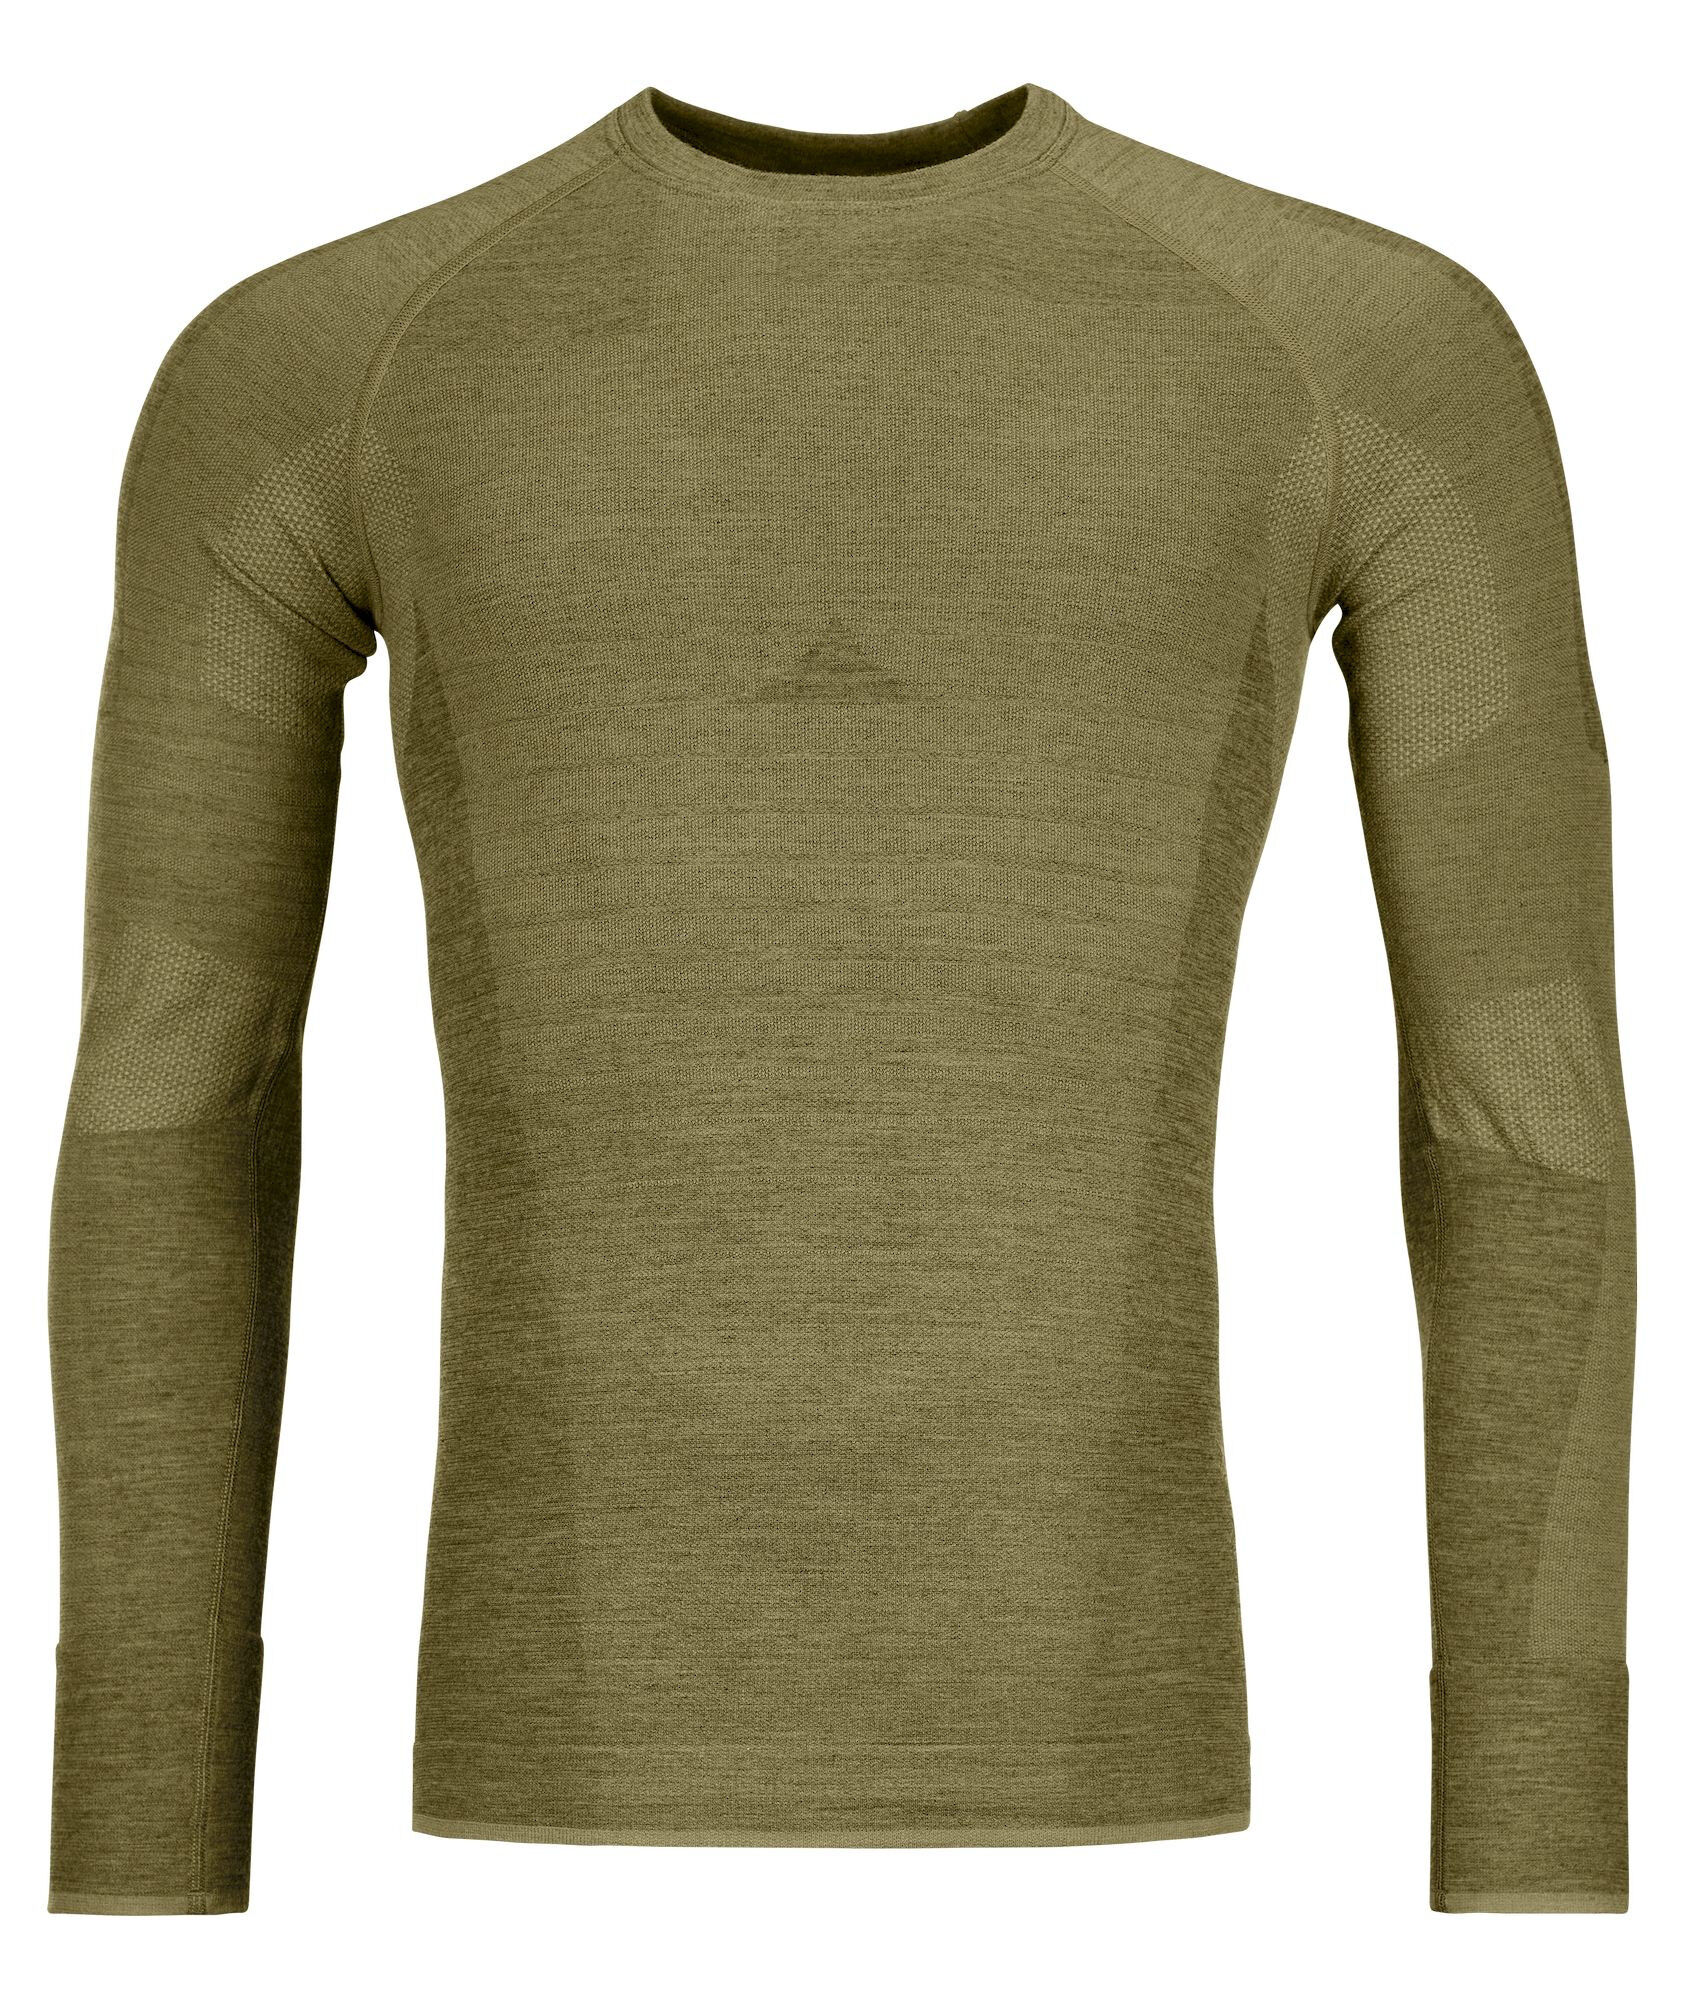 Ortovox 230 Competition Long Sleeve - Base layer - Men's